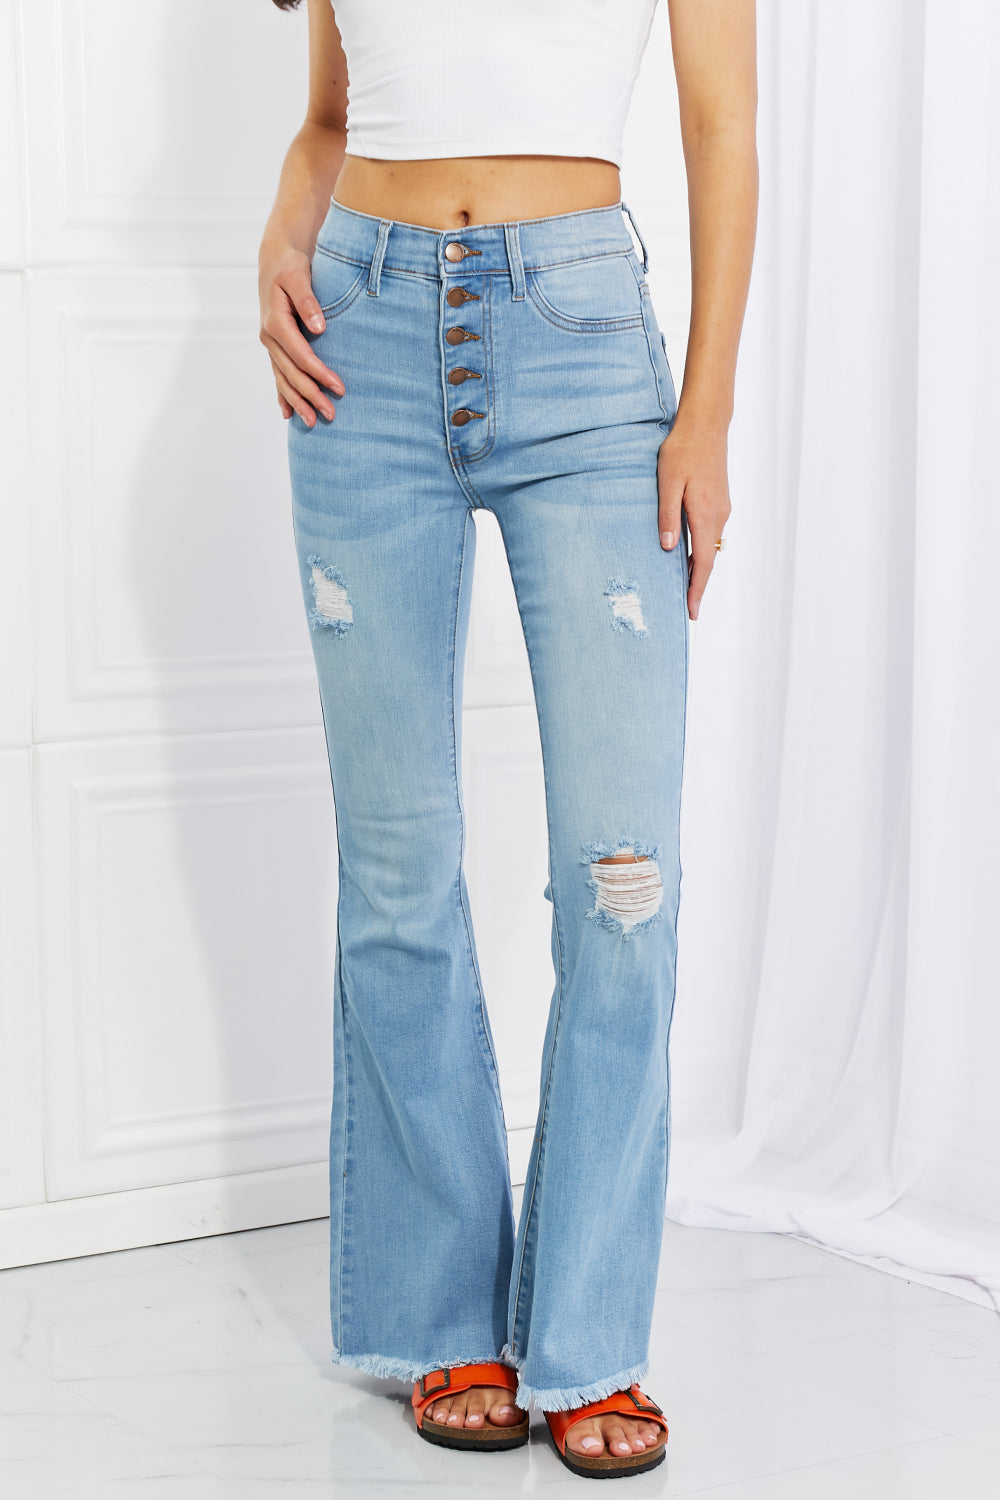 LIGHT Vibrant MIU Full Size Jess Button Flare Jeans - Ships from The US - women's jeans at TFC&H Co.